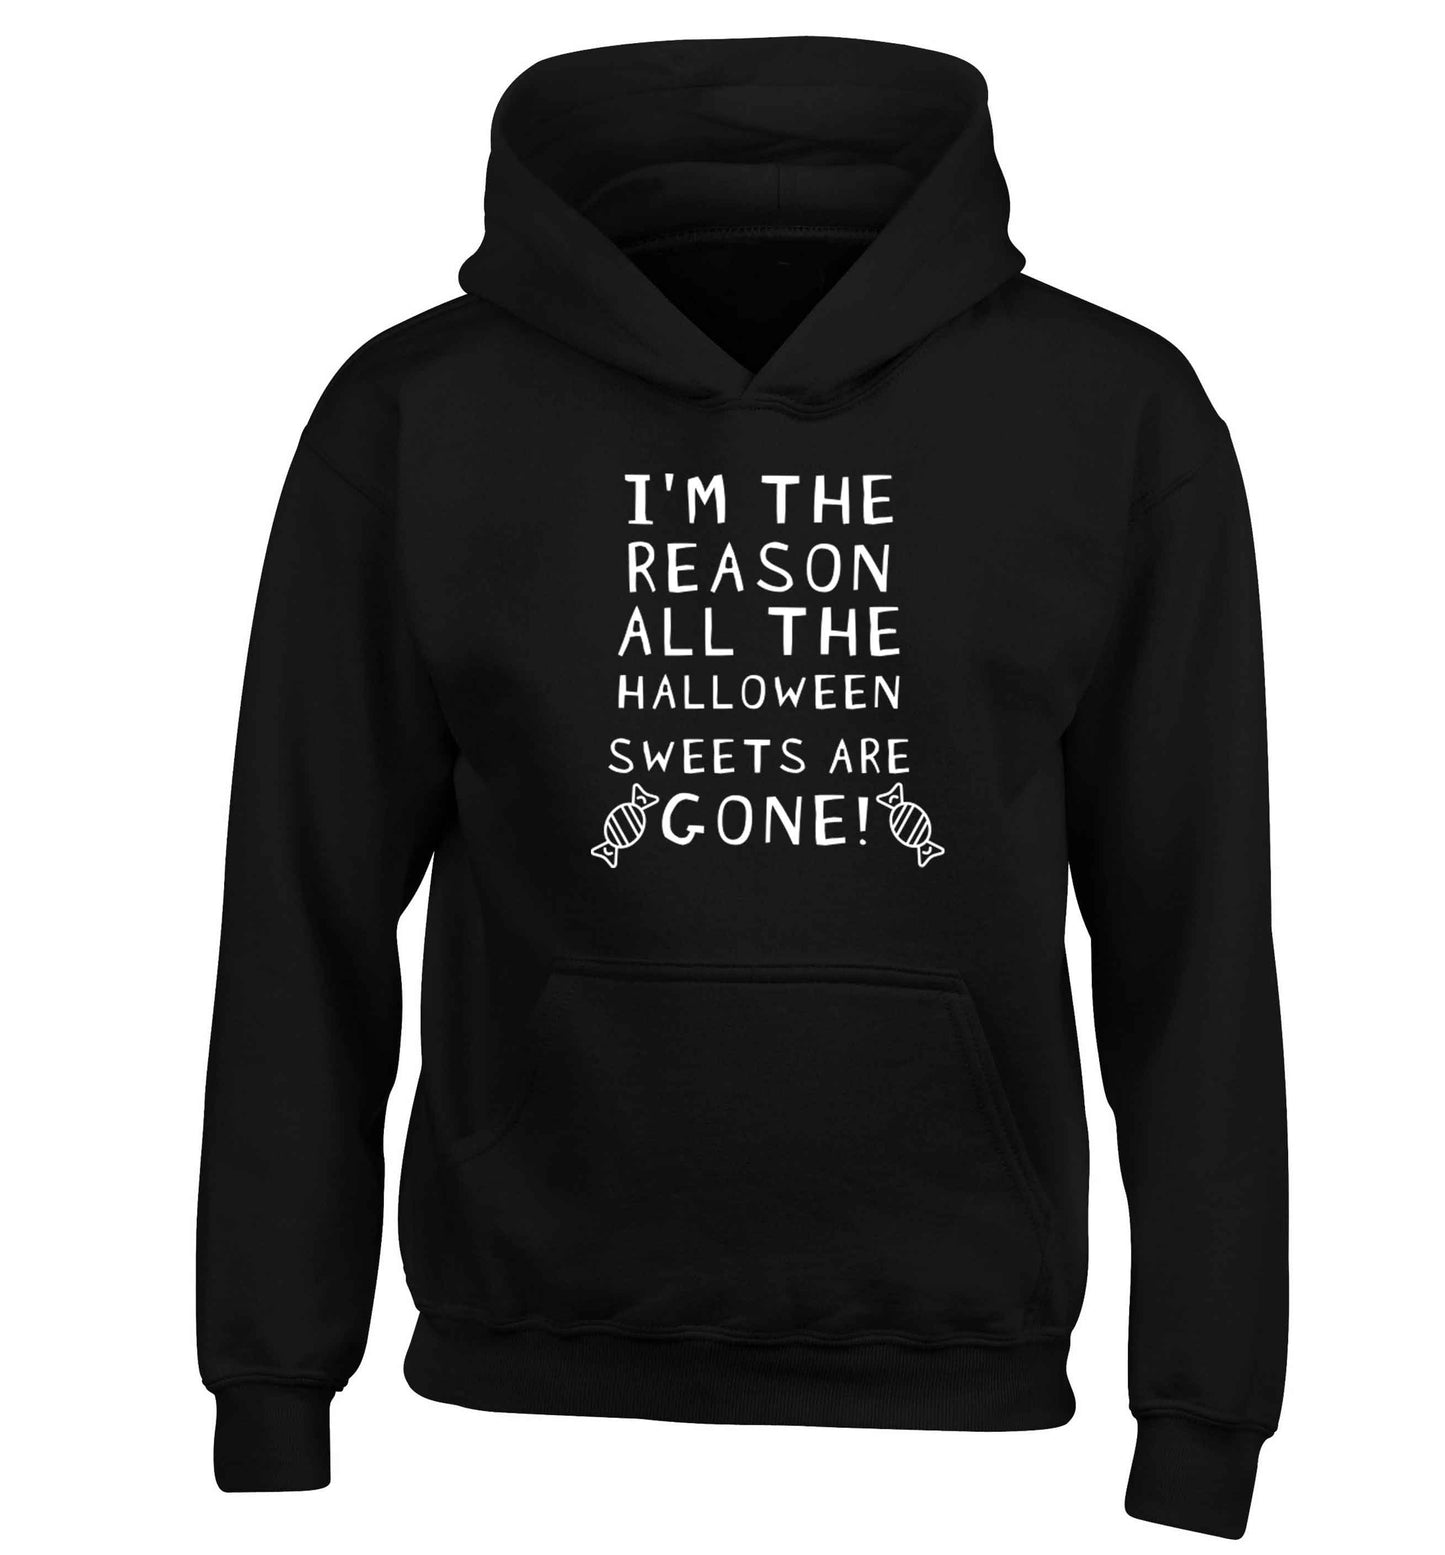 I'm the reason all of the halloween sweets are gone children's black hoodie 12-13 Years